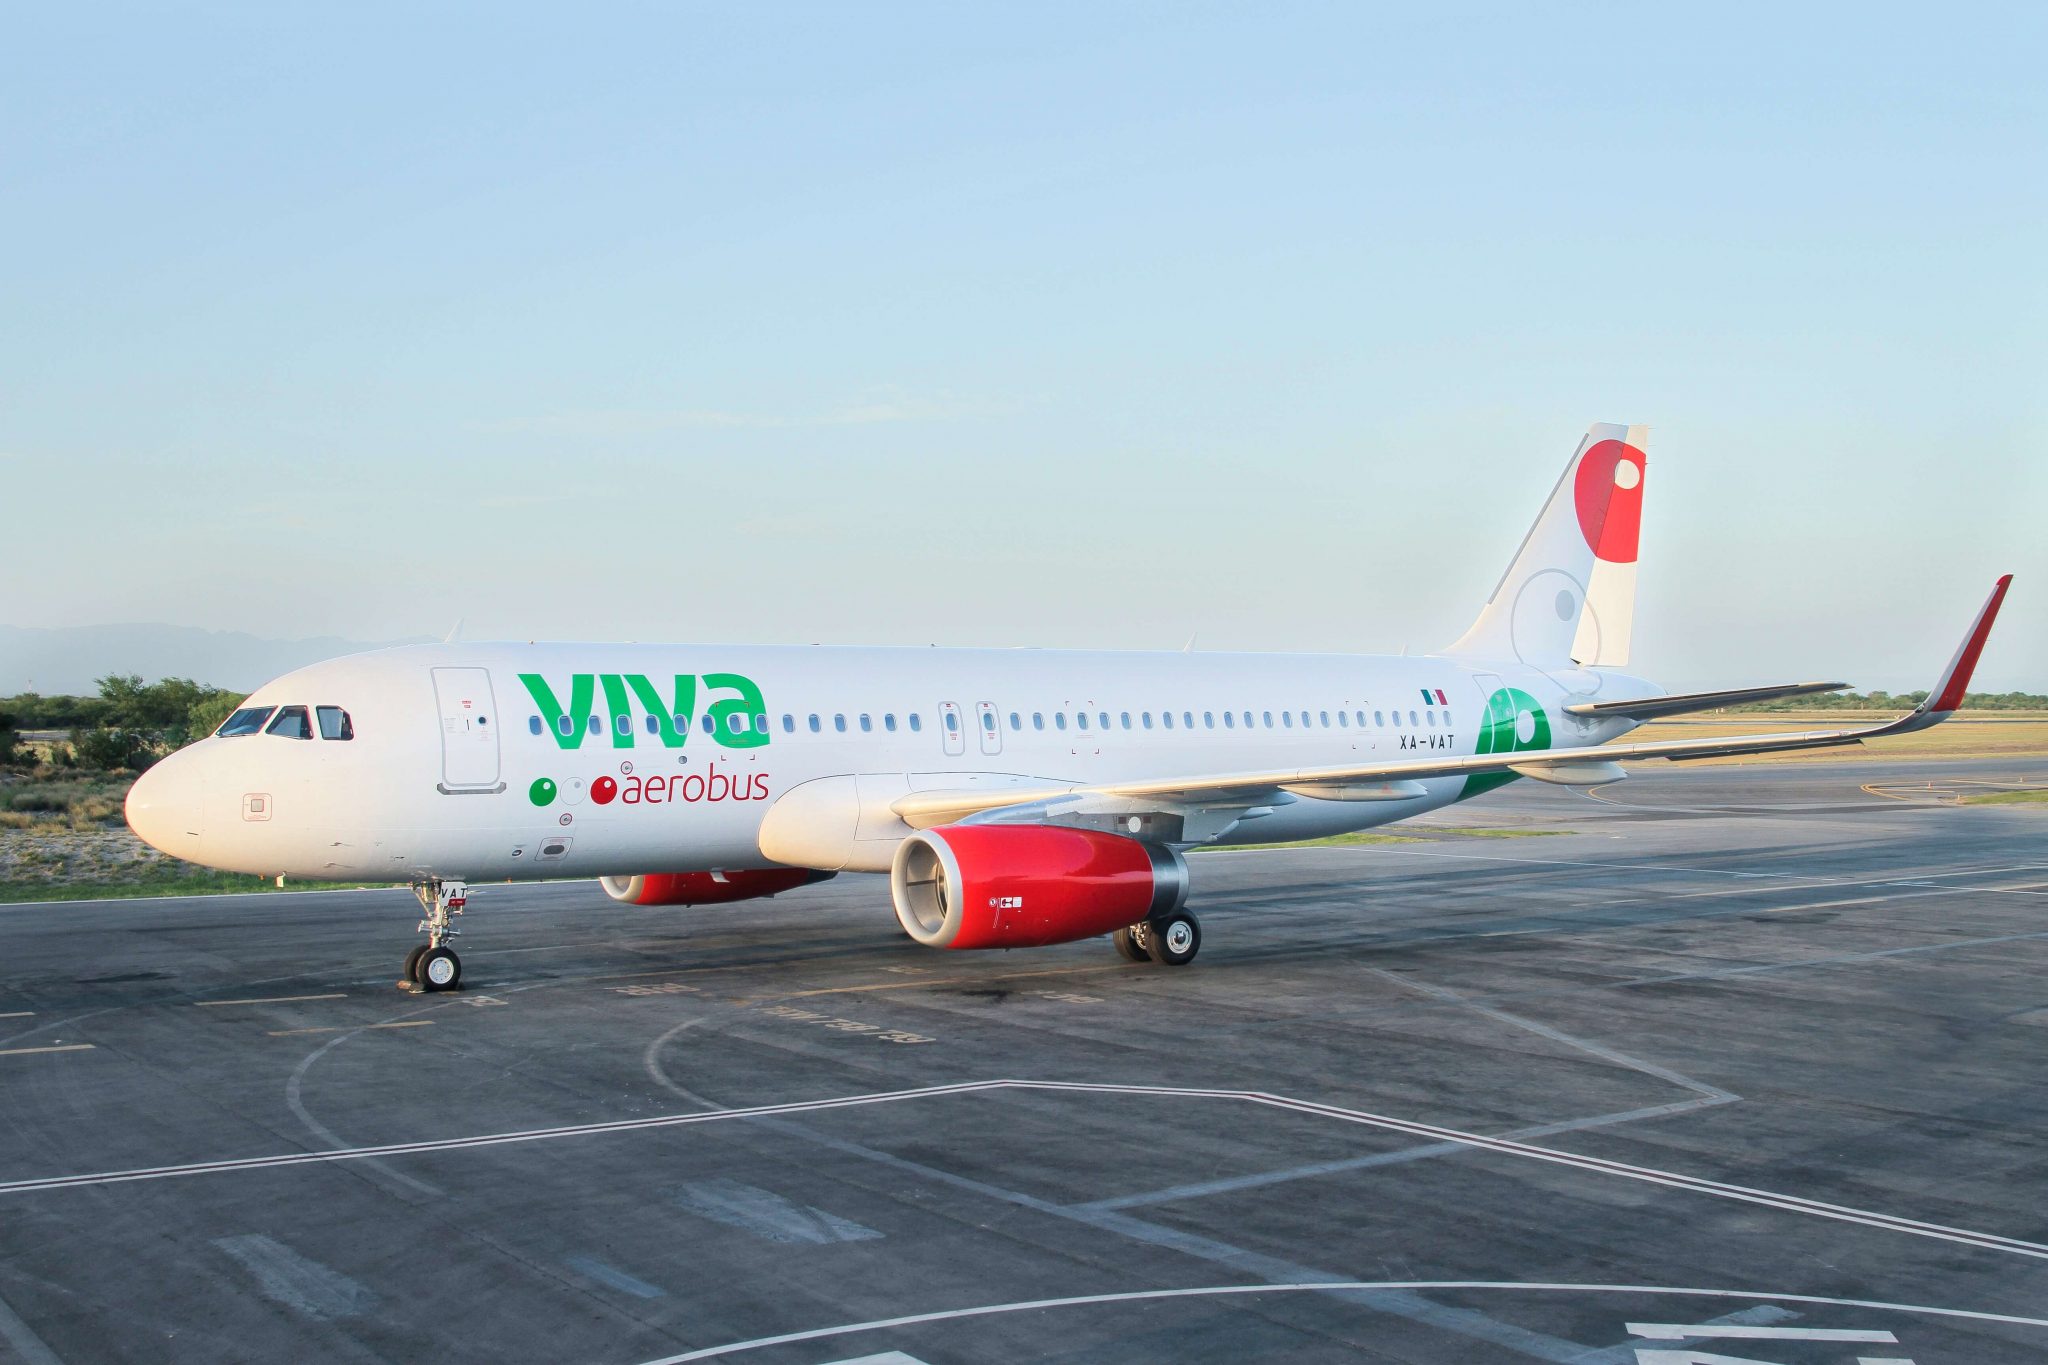 SMBC Aviation Capital signs seven aircraft sale-leaseback deal including PDP financing with Viva Aerobus